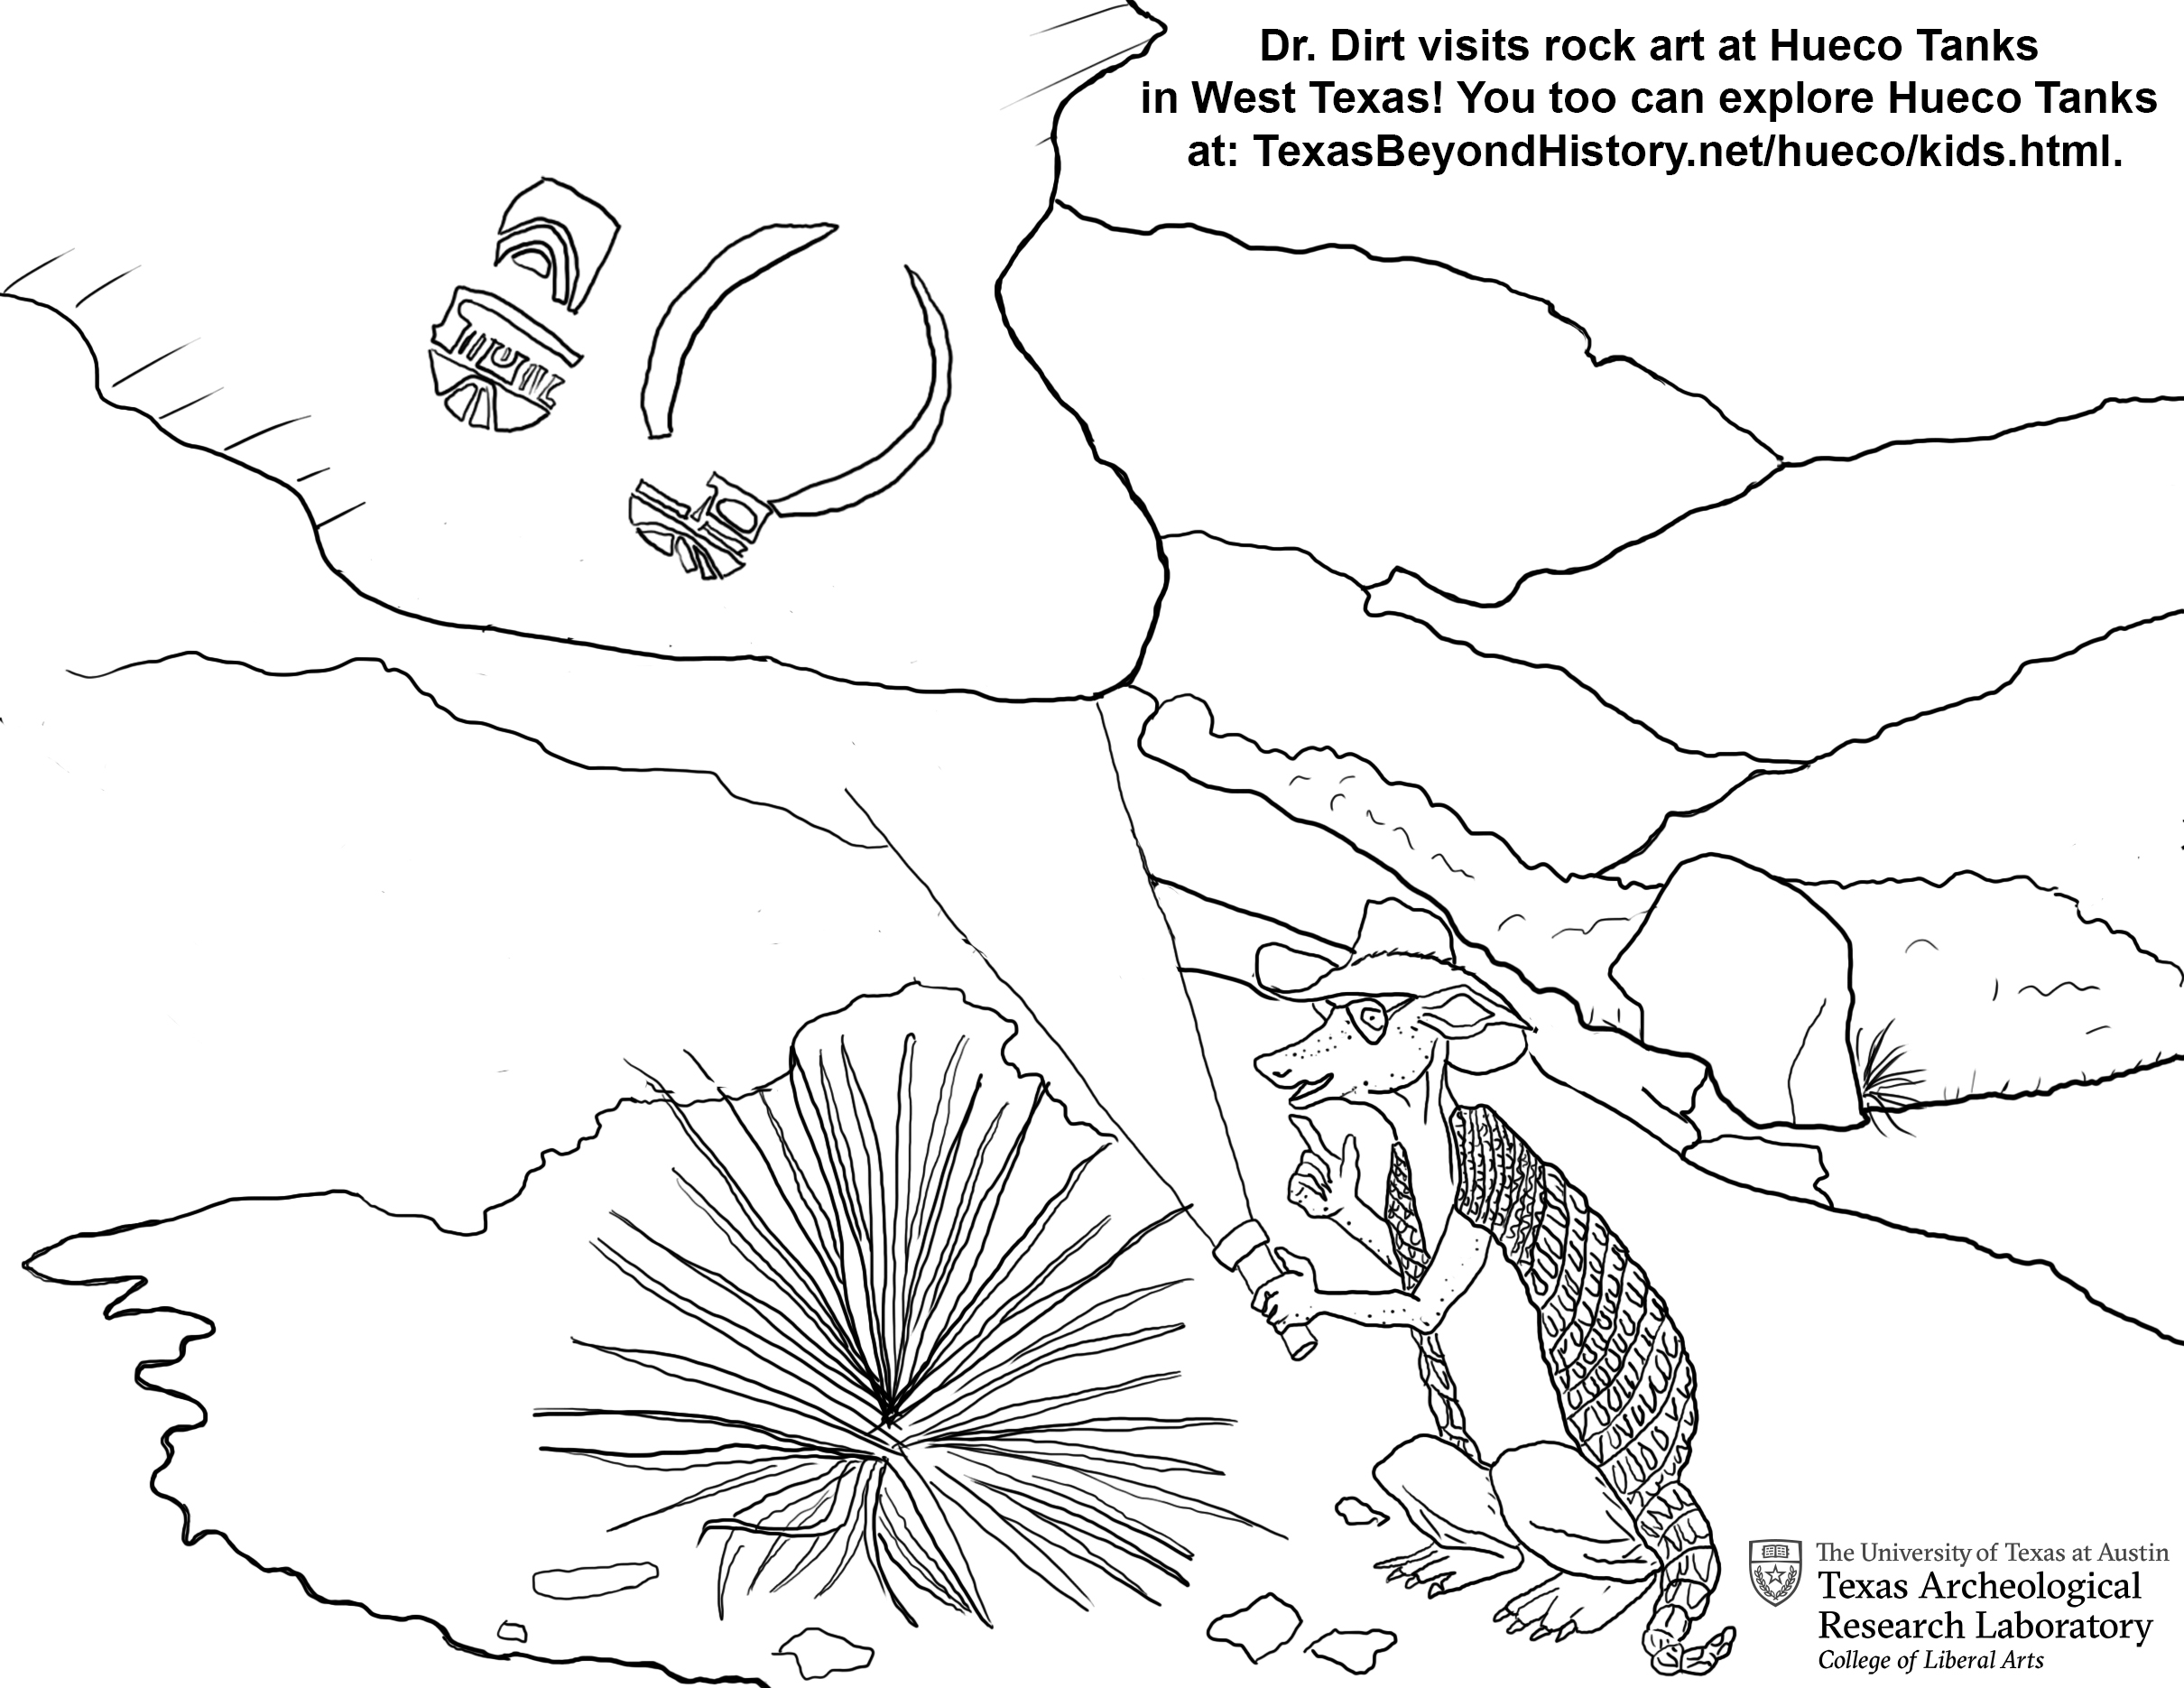 black and white drawing of armadillo holding a flashlight and rock art faces under a rock overhang